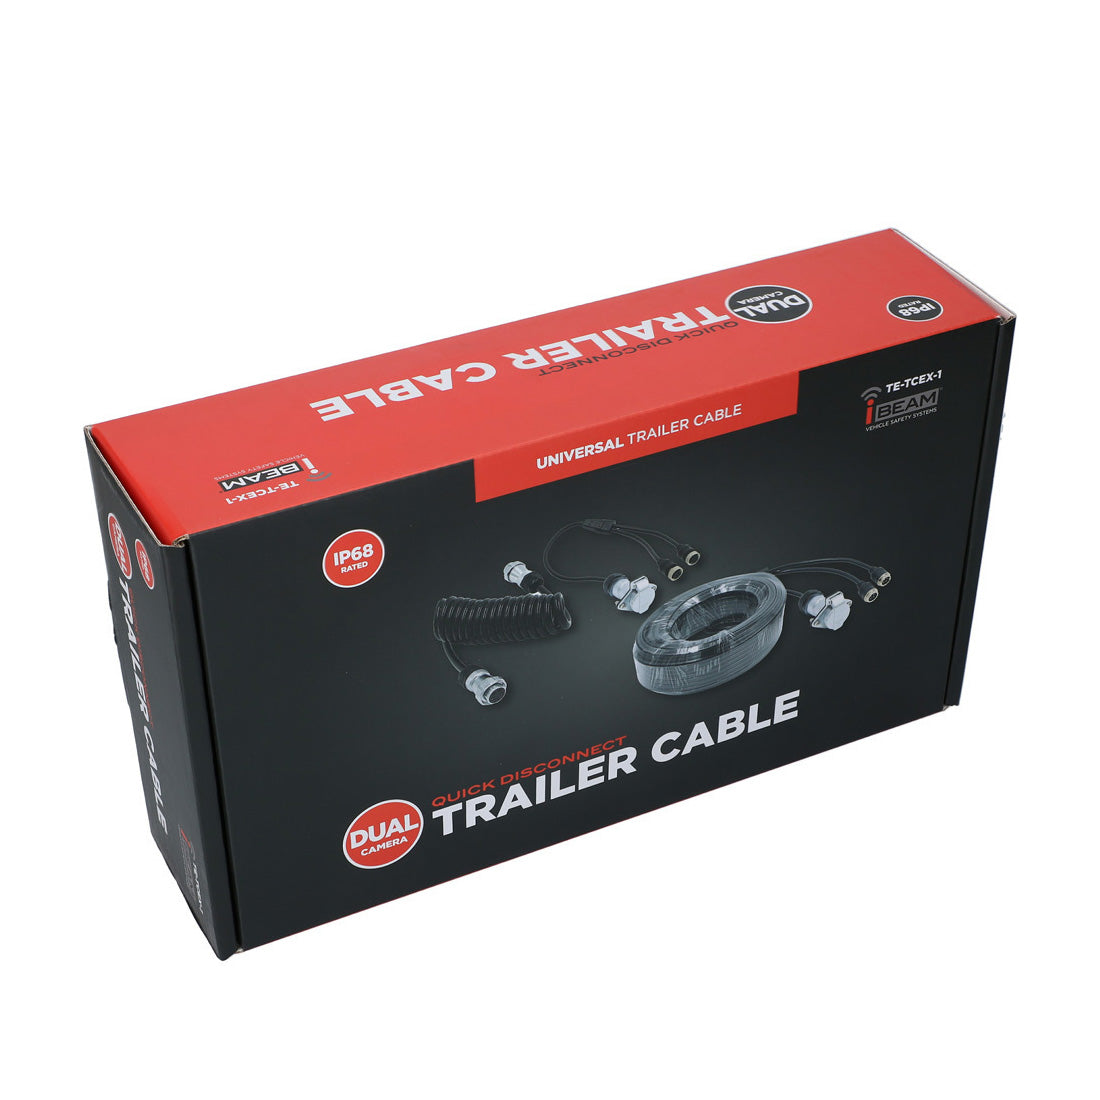 iBeam TE-TCEX-1 Universal Dual Channel Camera Quick Disconnect Trailer Cable